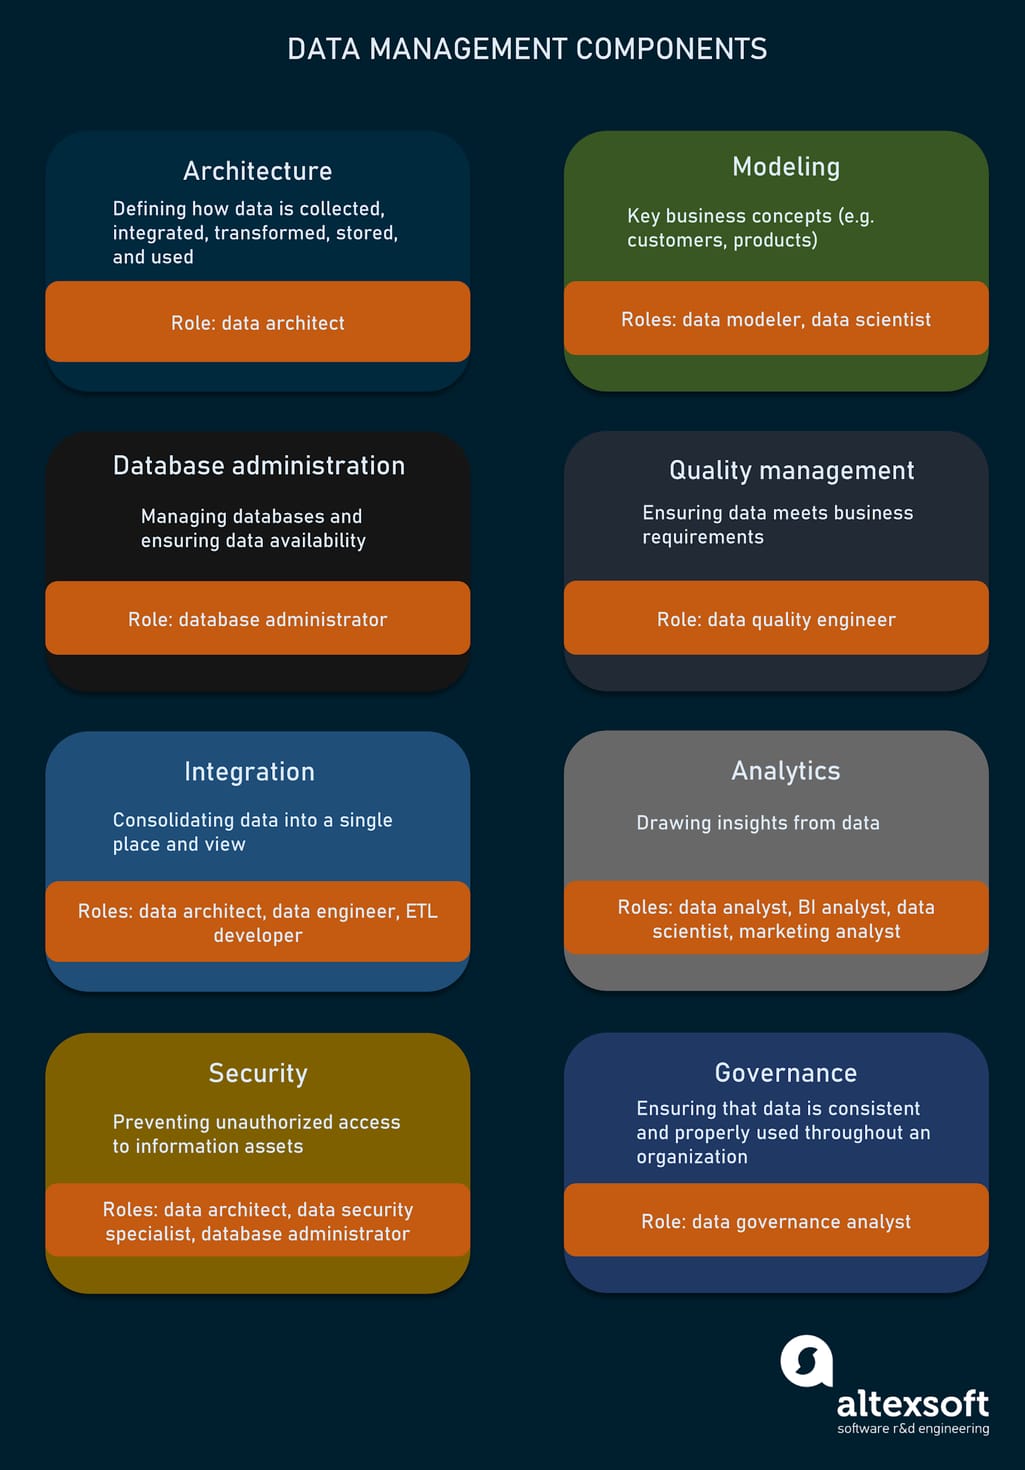 Key disciplines and roles in data management